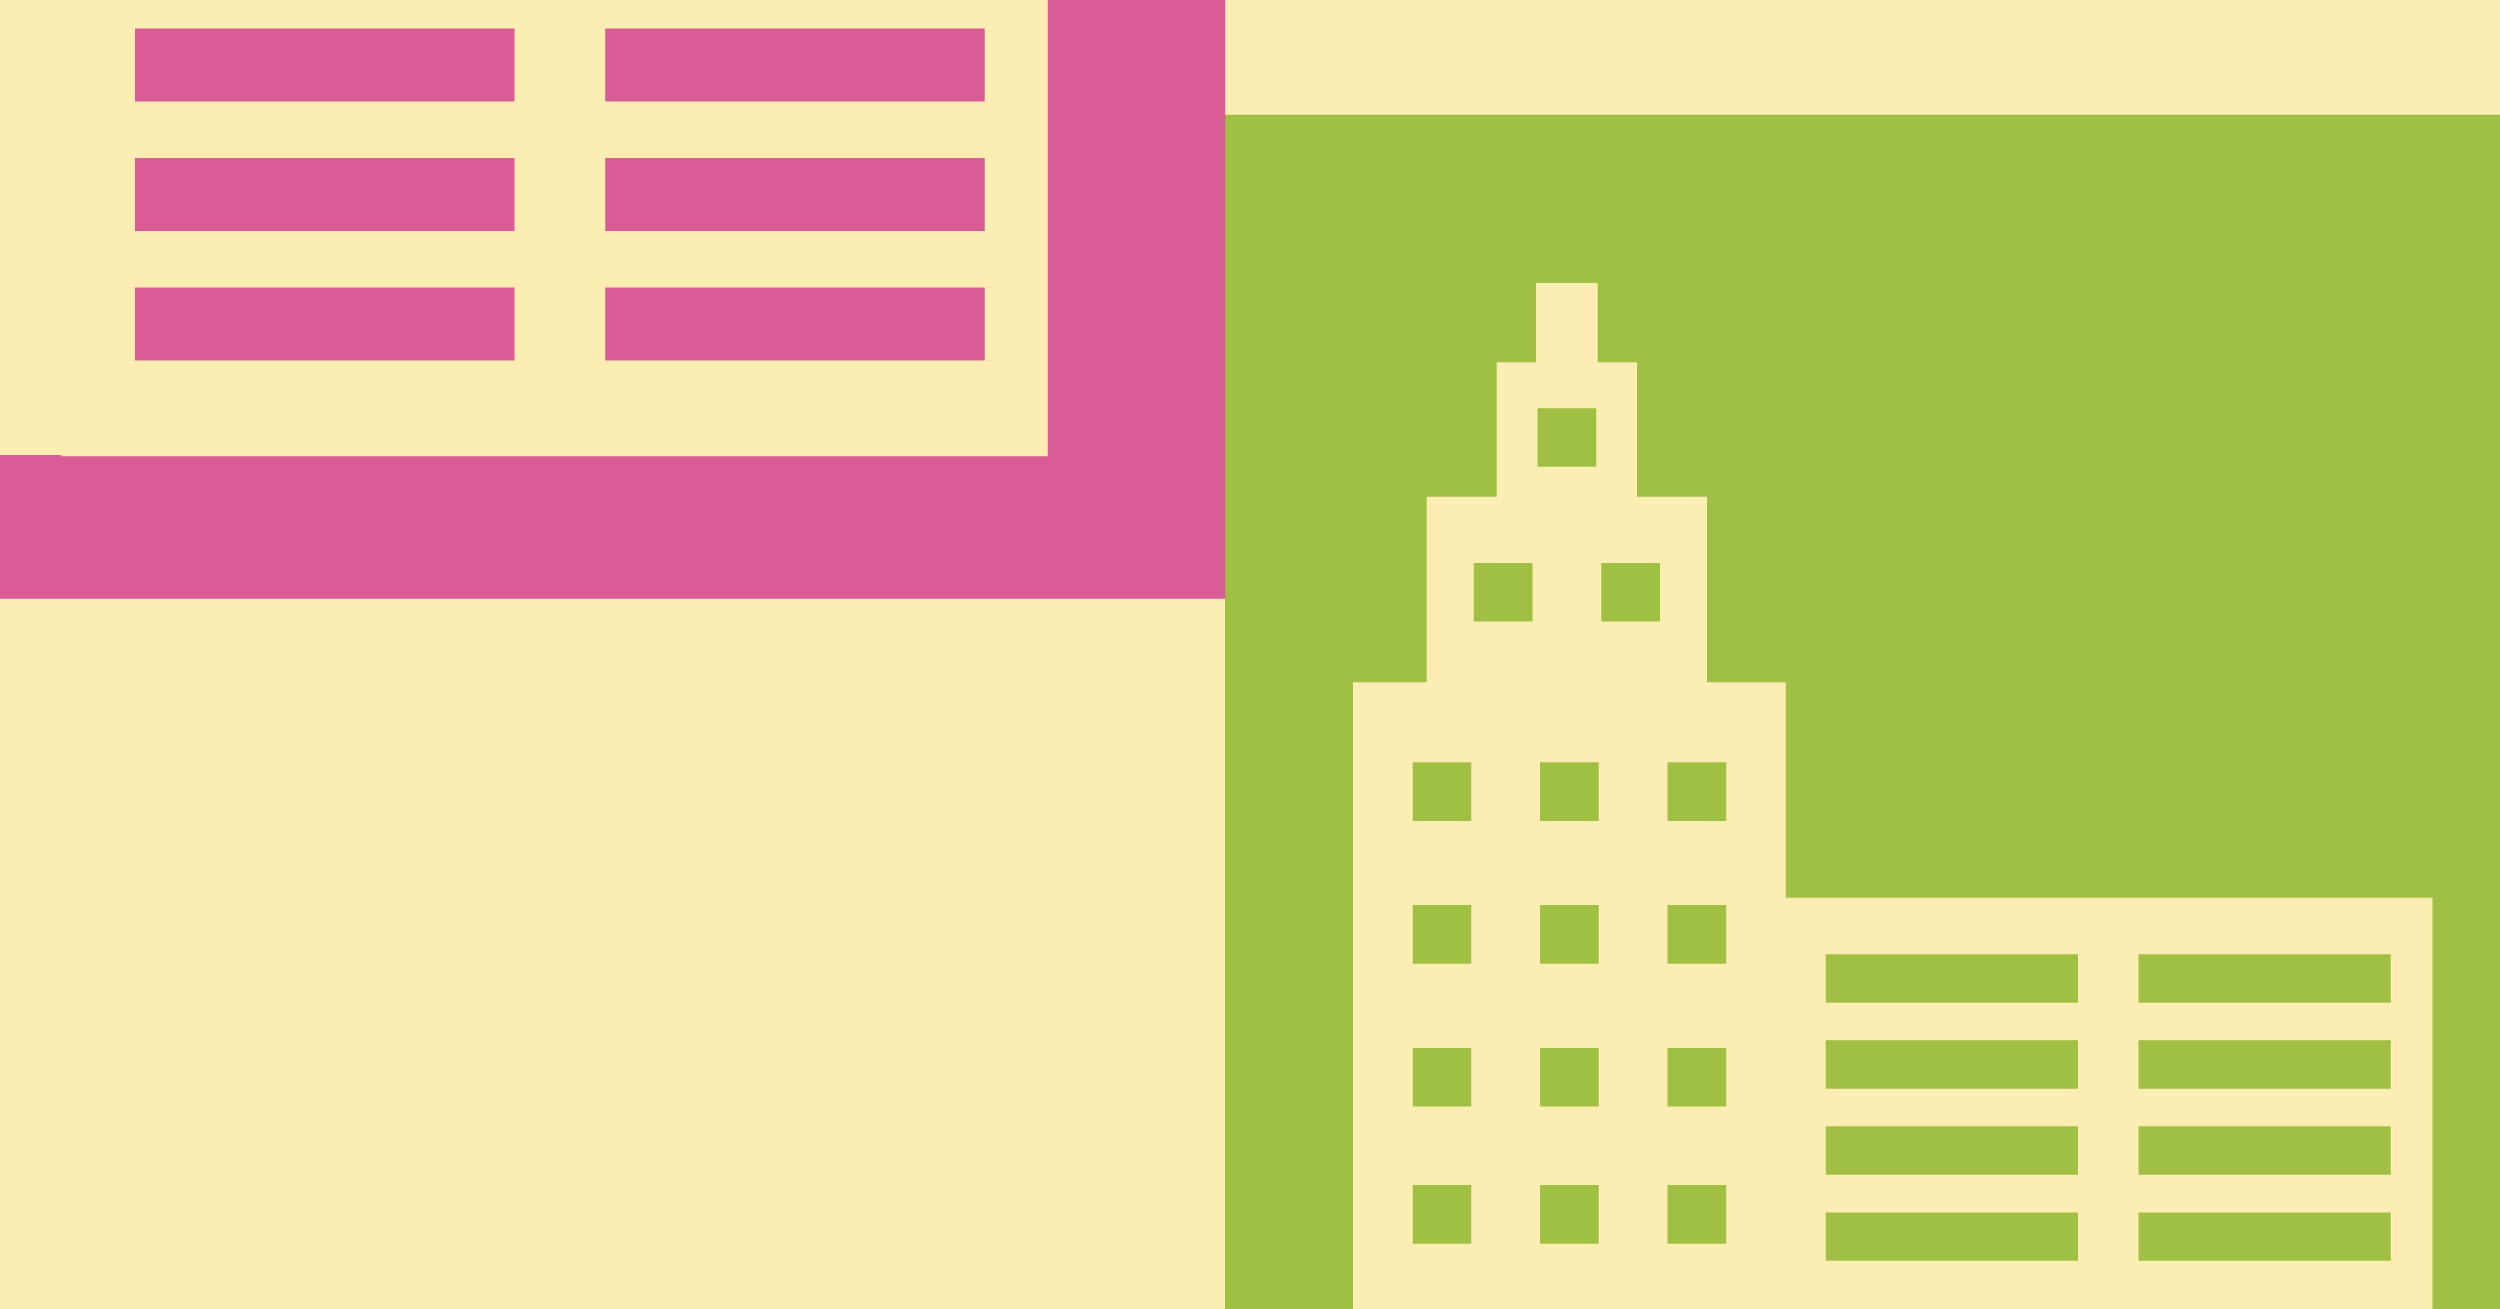 Illustration of a yellow building outlined in light green and part of a yellow building outlined in pink in front of a yellow background depicting the real estate industry